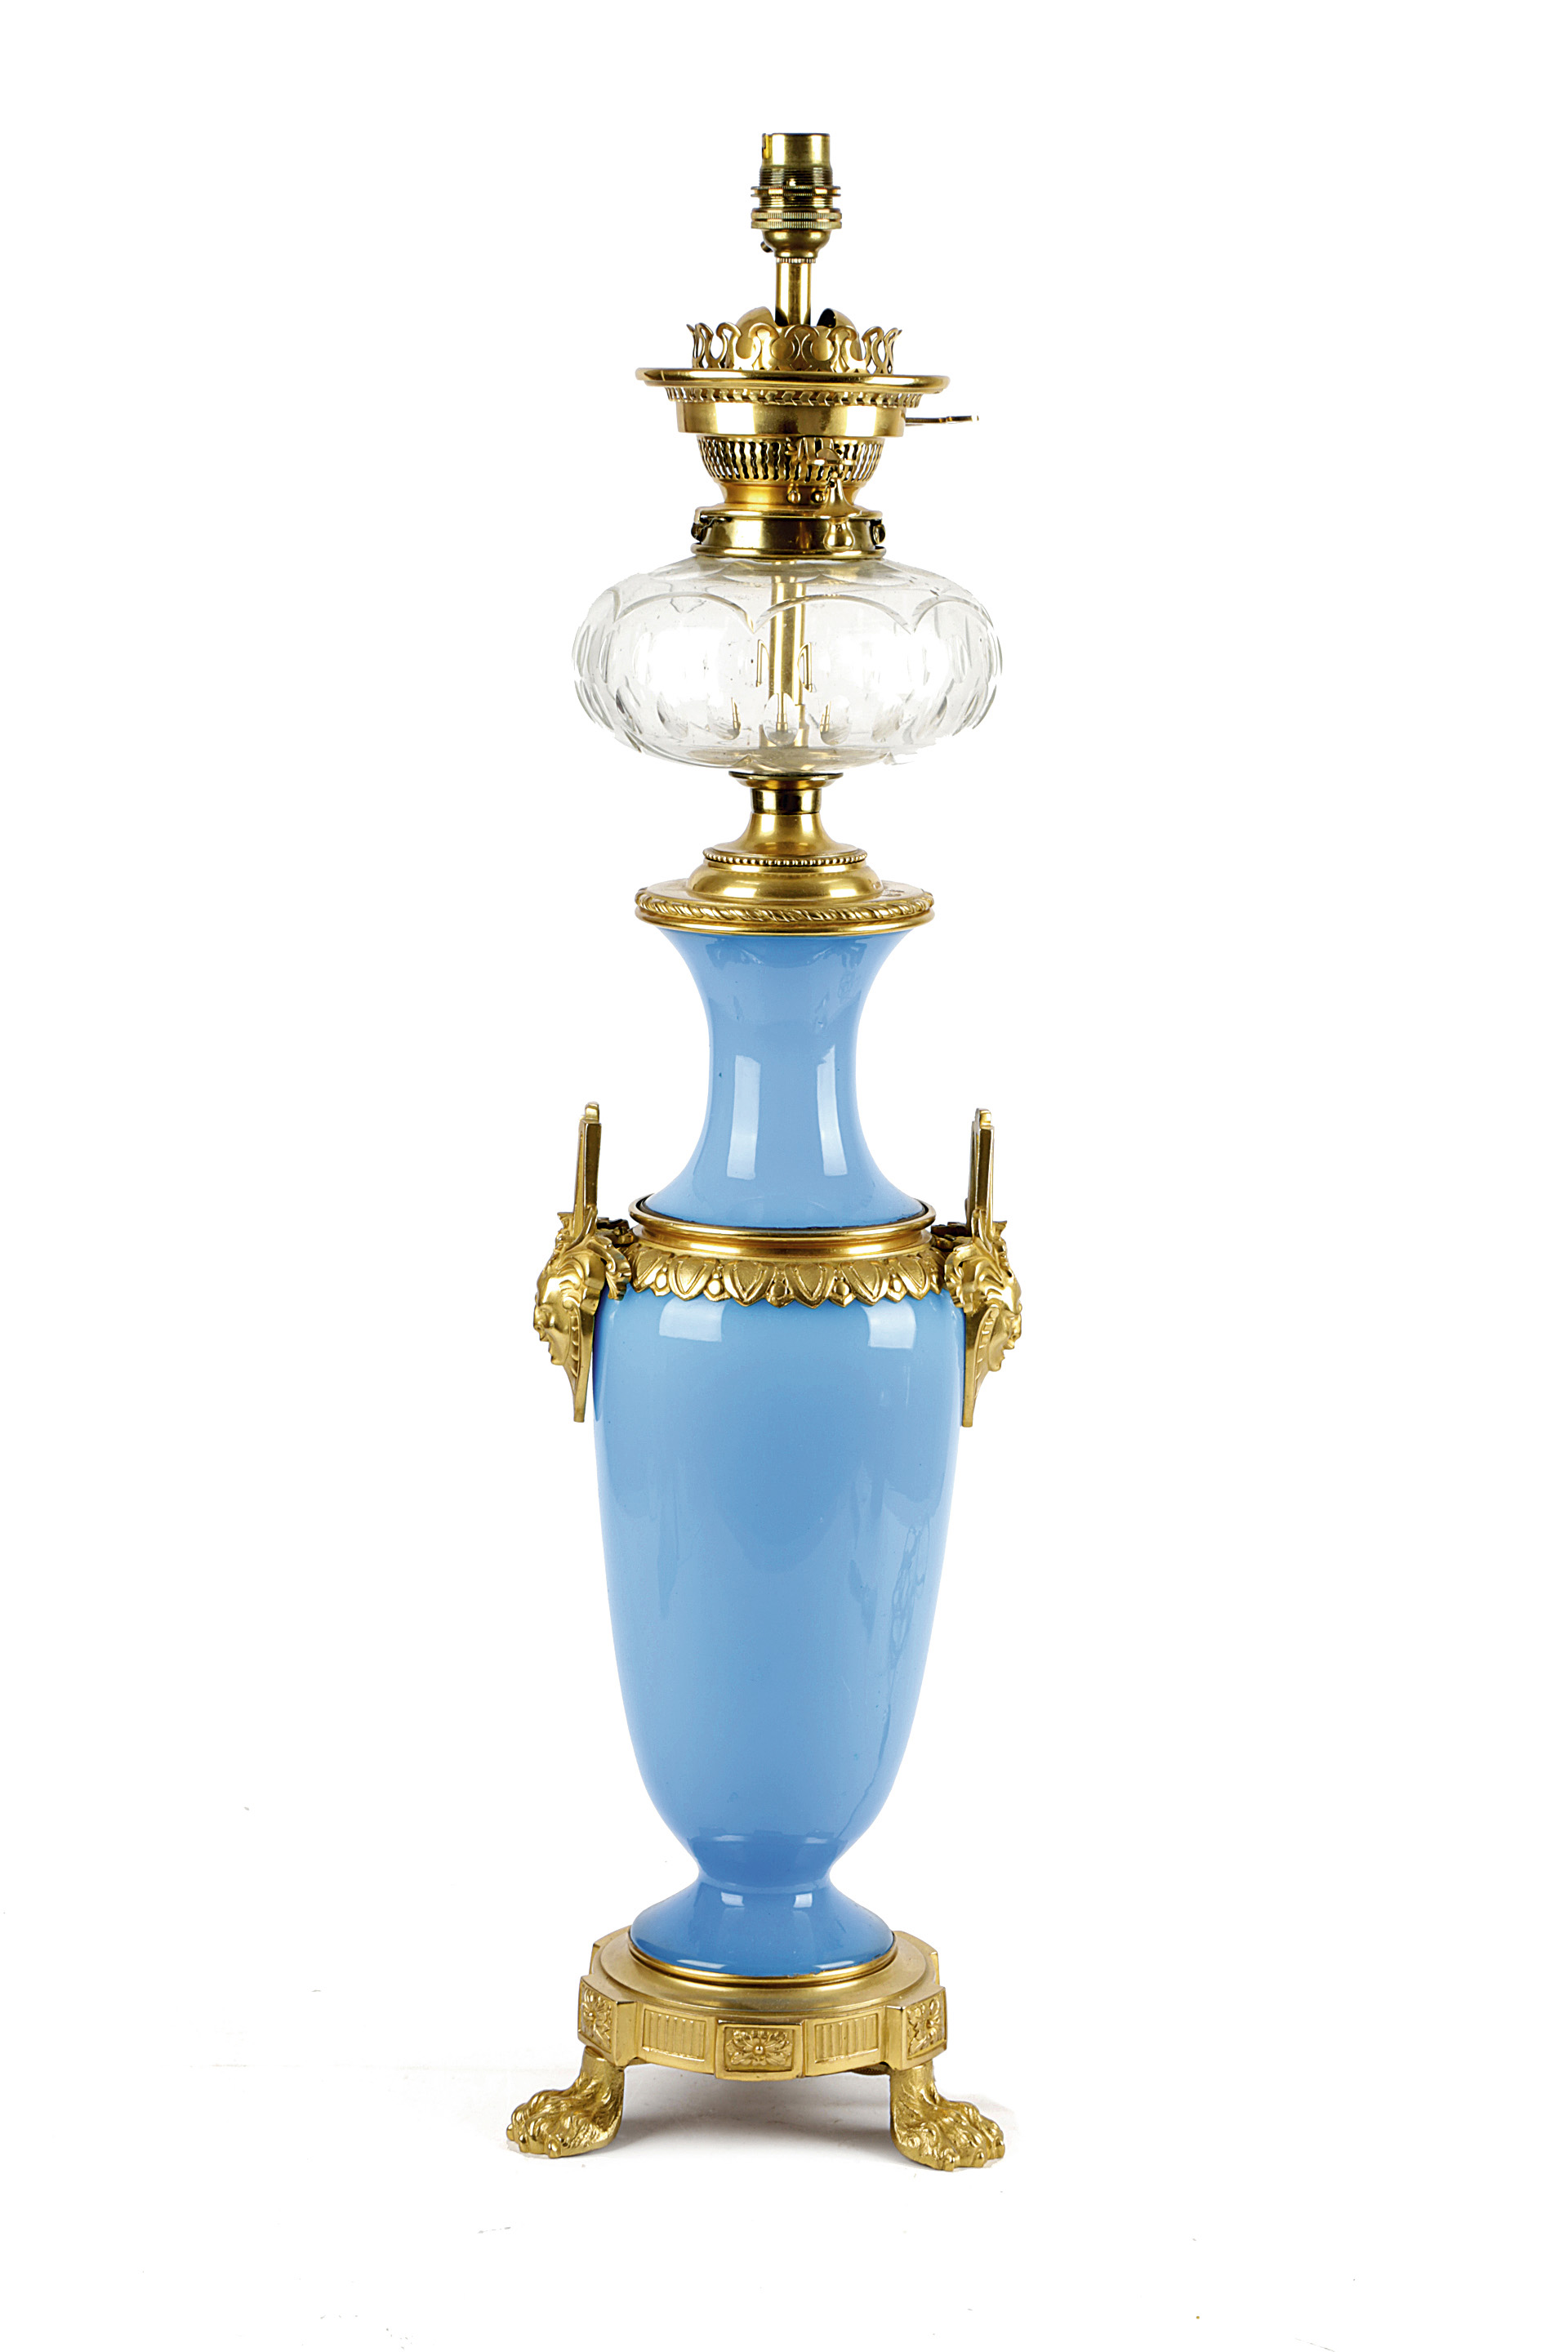 A FRENCH BLUE OPALINE GLASS AND ORMOLU OIL LAMP LATE 19TH CENTURY with a cut-glass reservoir,